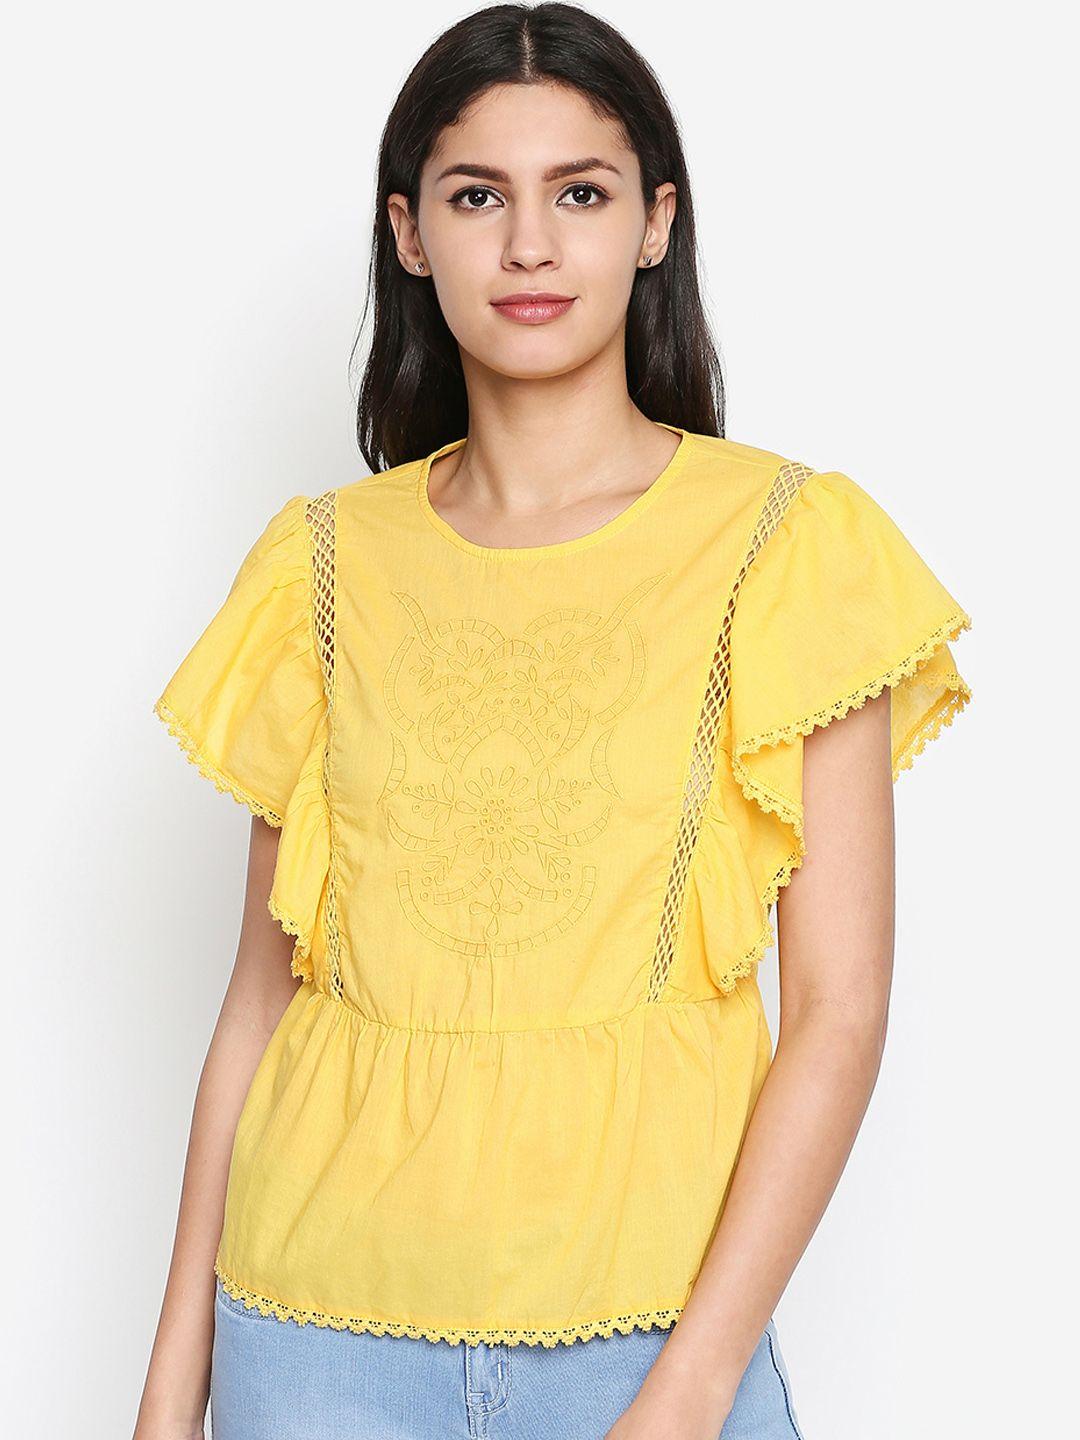 oxolloxo-women-yellow-embroidered-pure-cotton-top